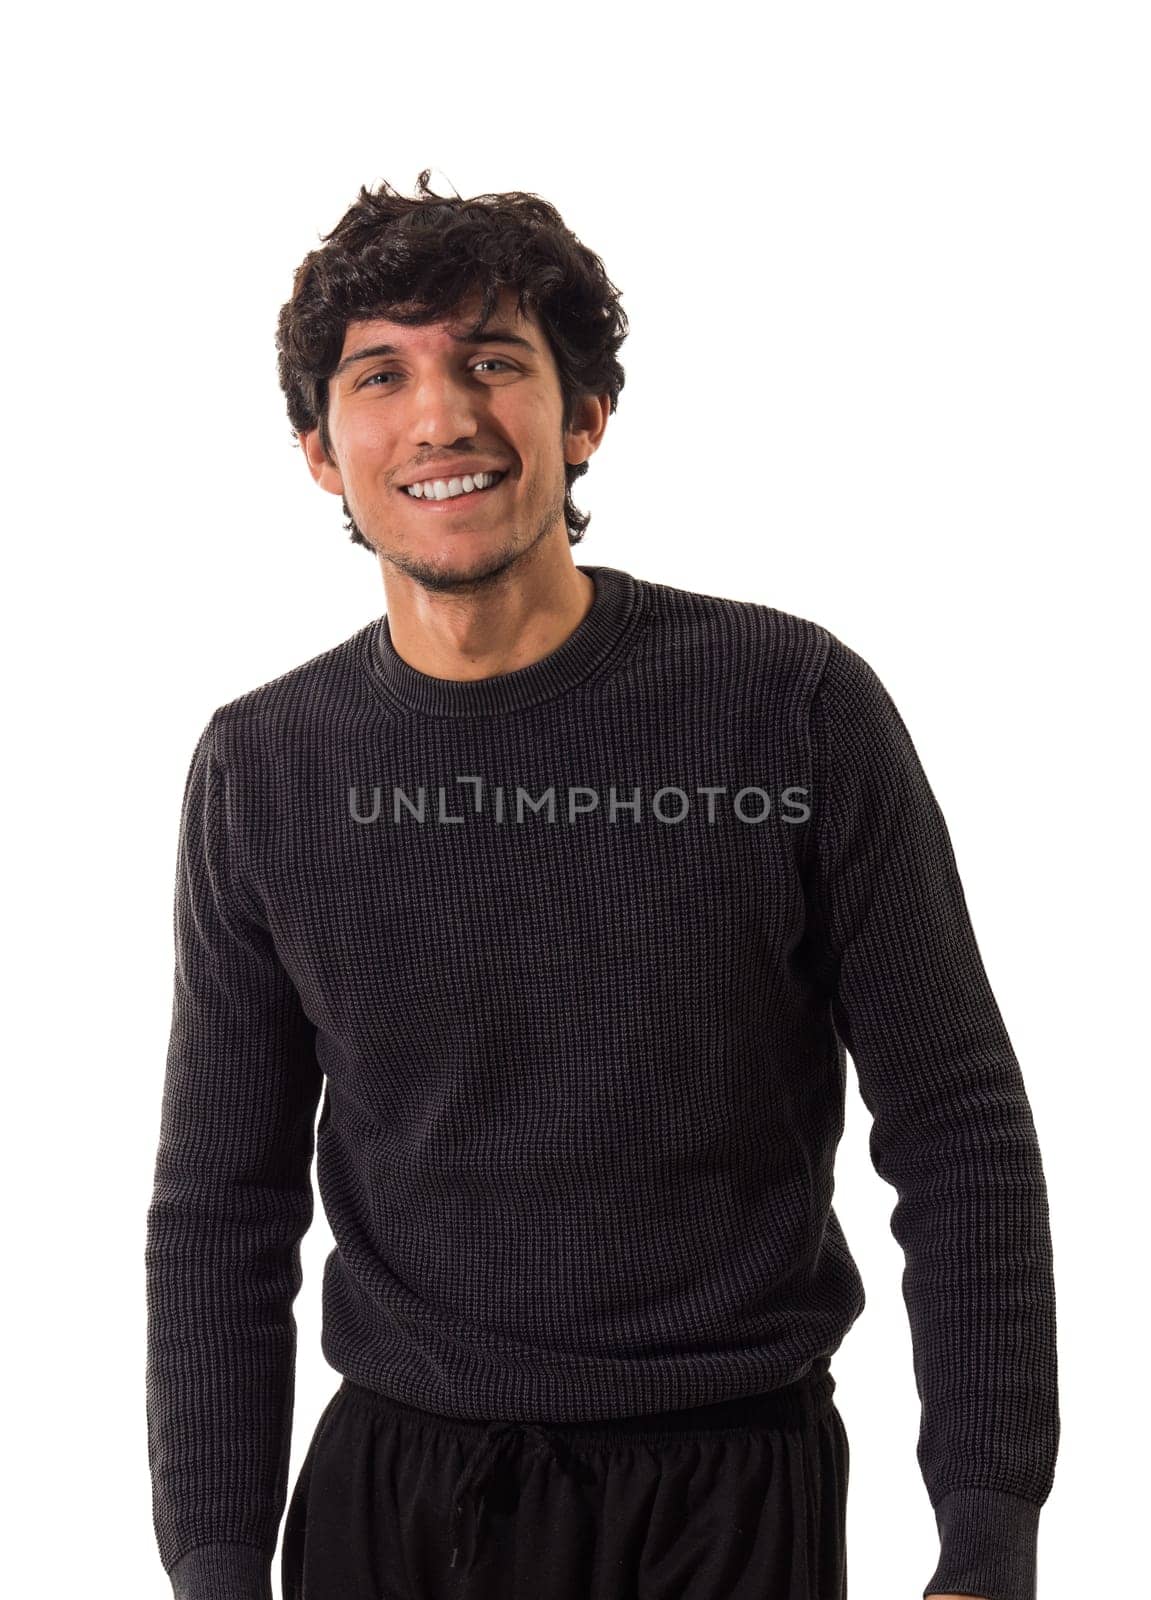 A young handsome man in a black sweater and black pants, smiling with a friendly expression to the camera